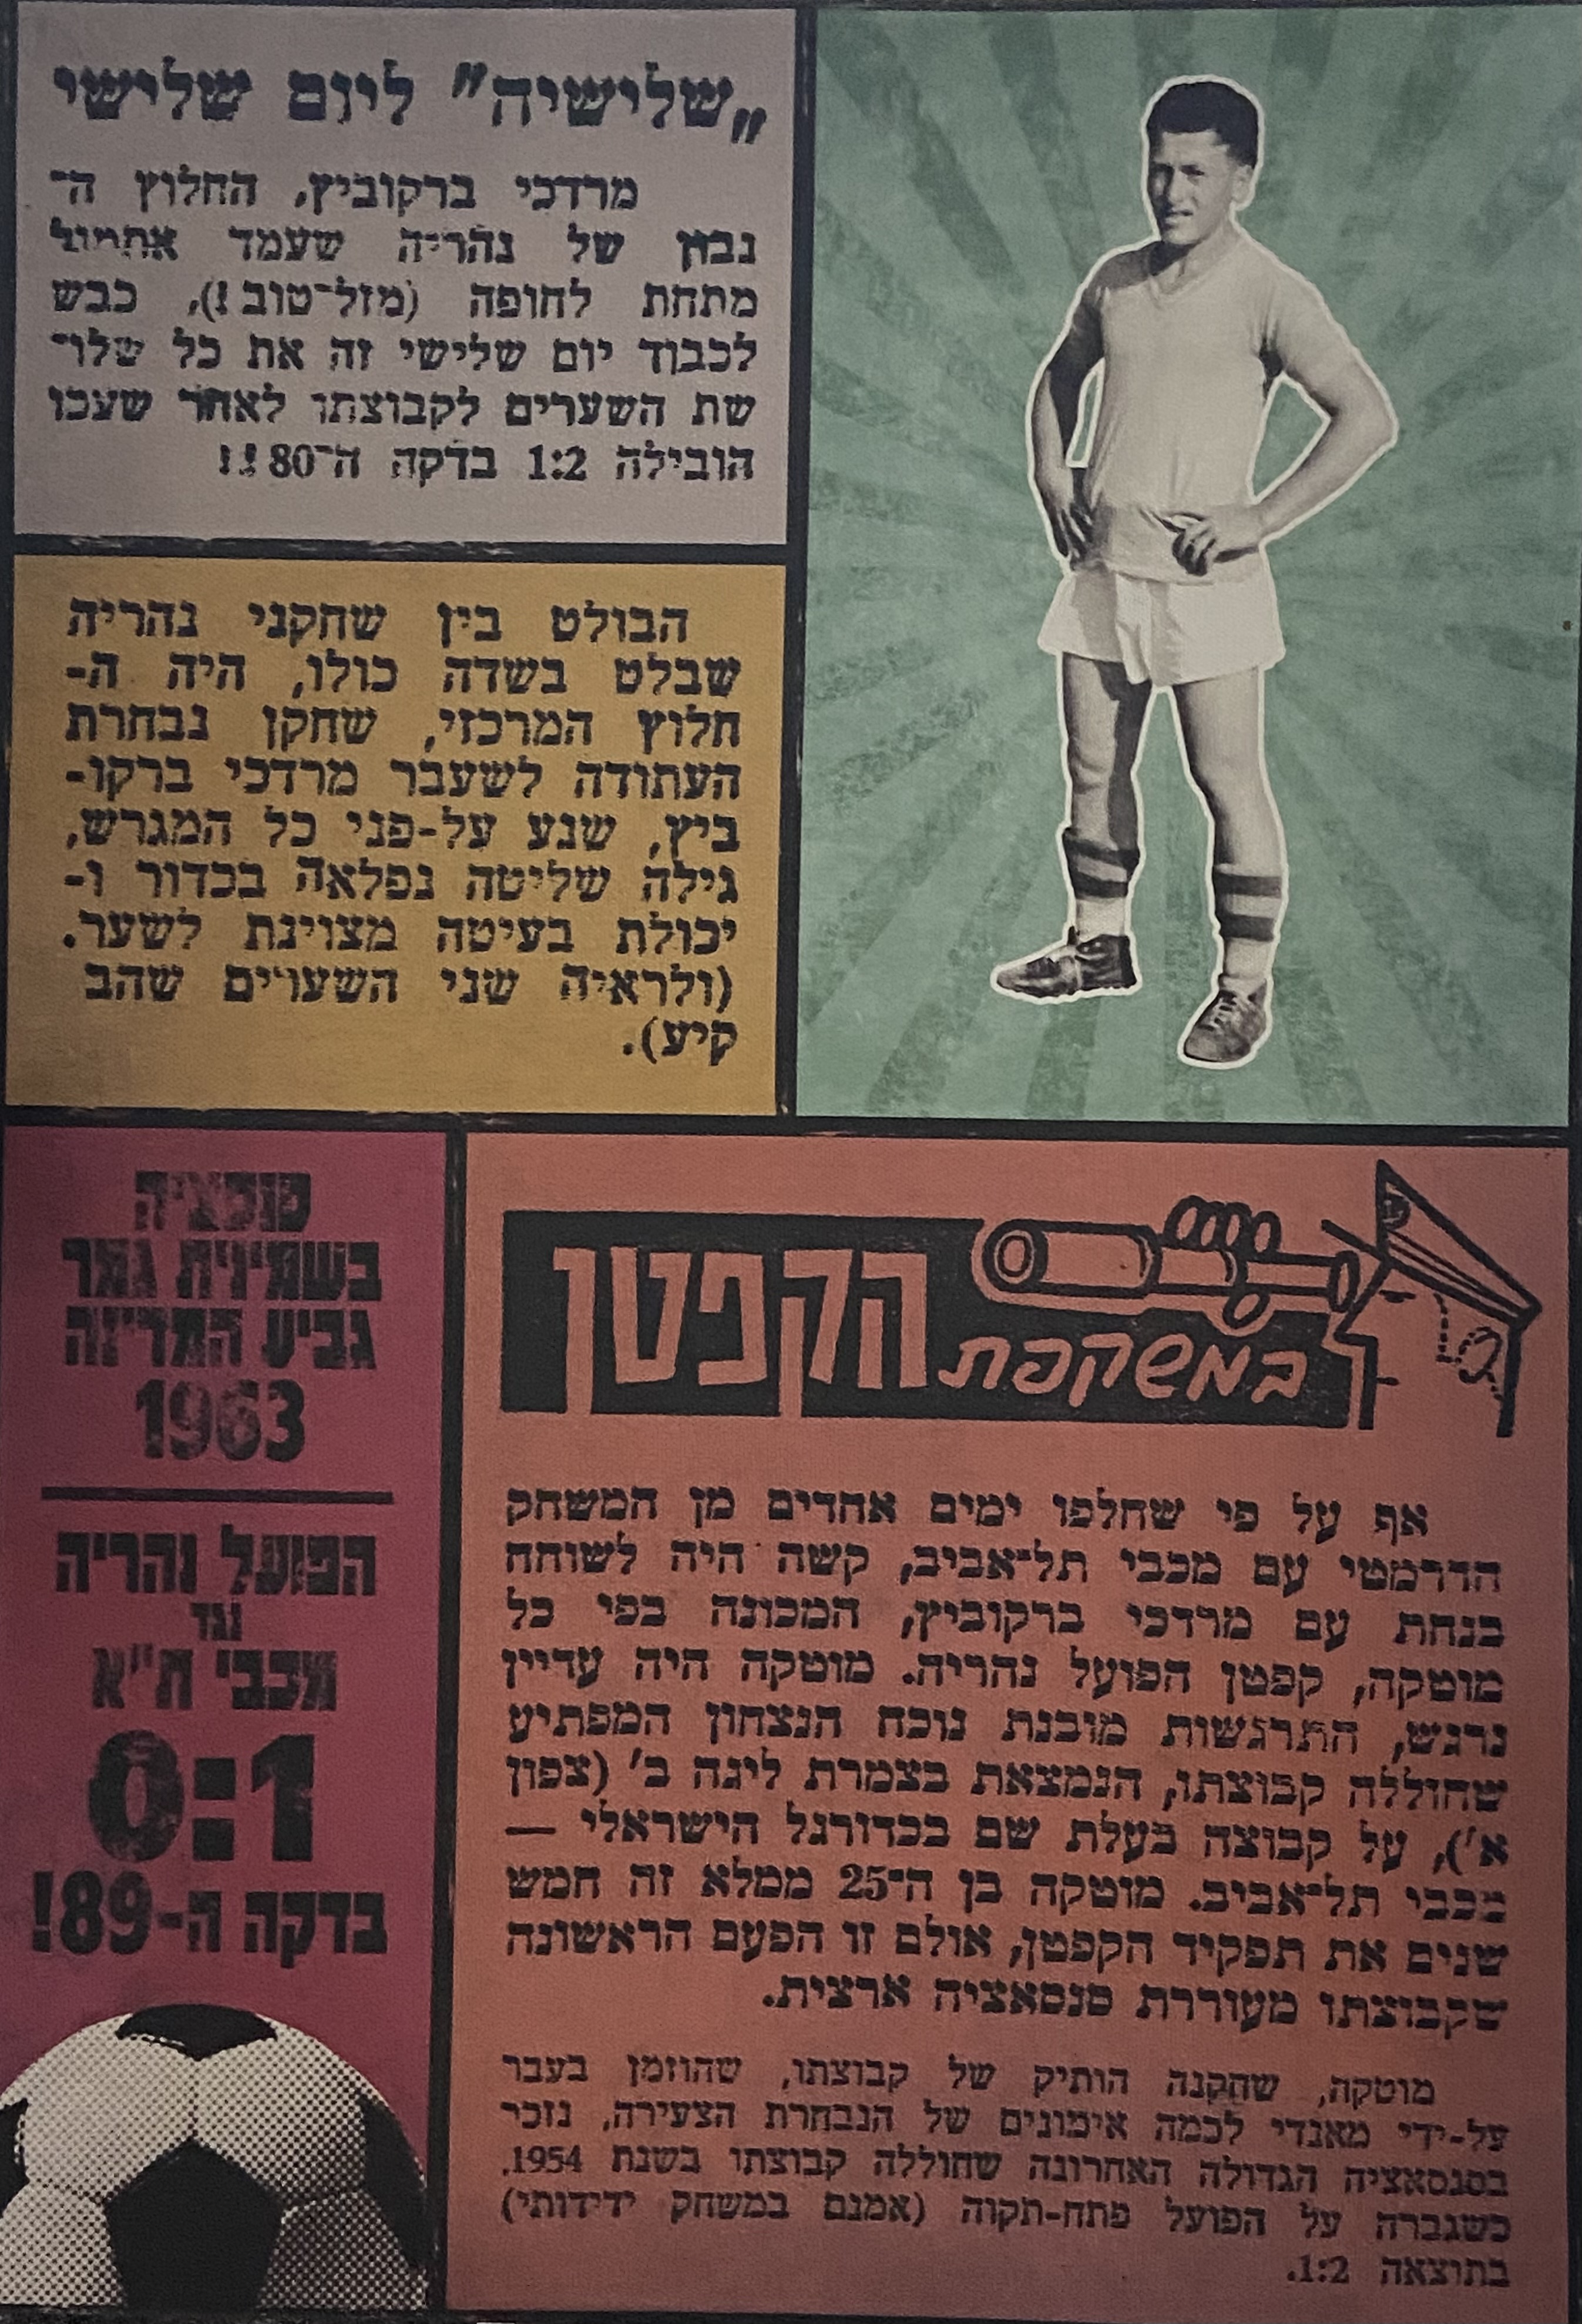 Collected press clippings about Motke's career as a player on the Hapoel Nahariya soccer team.